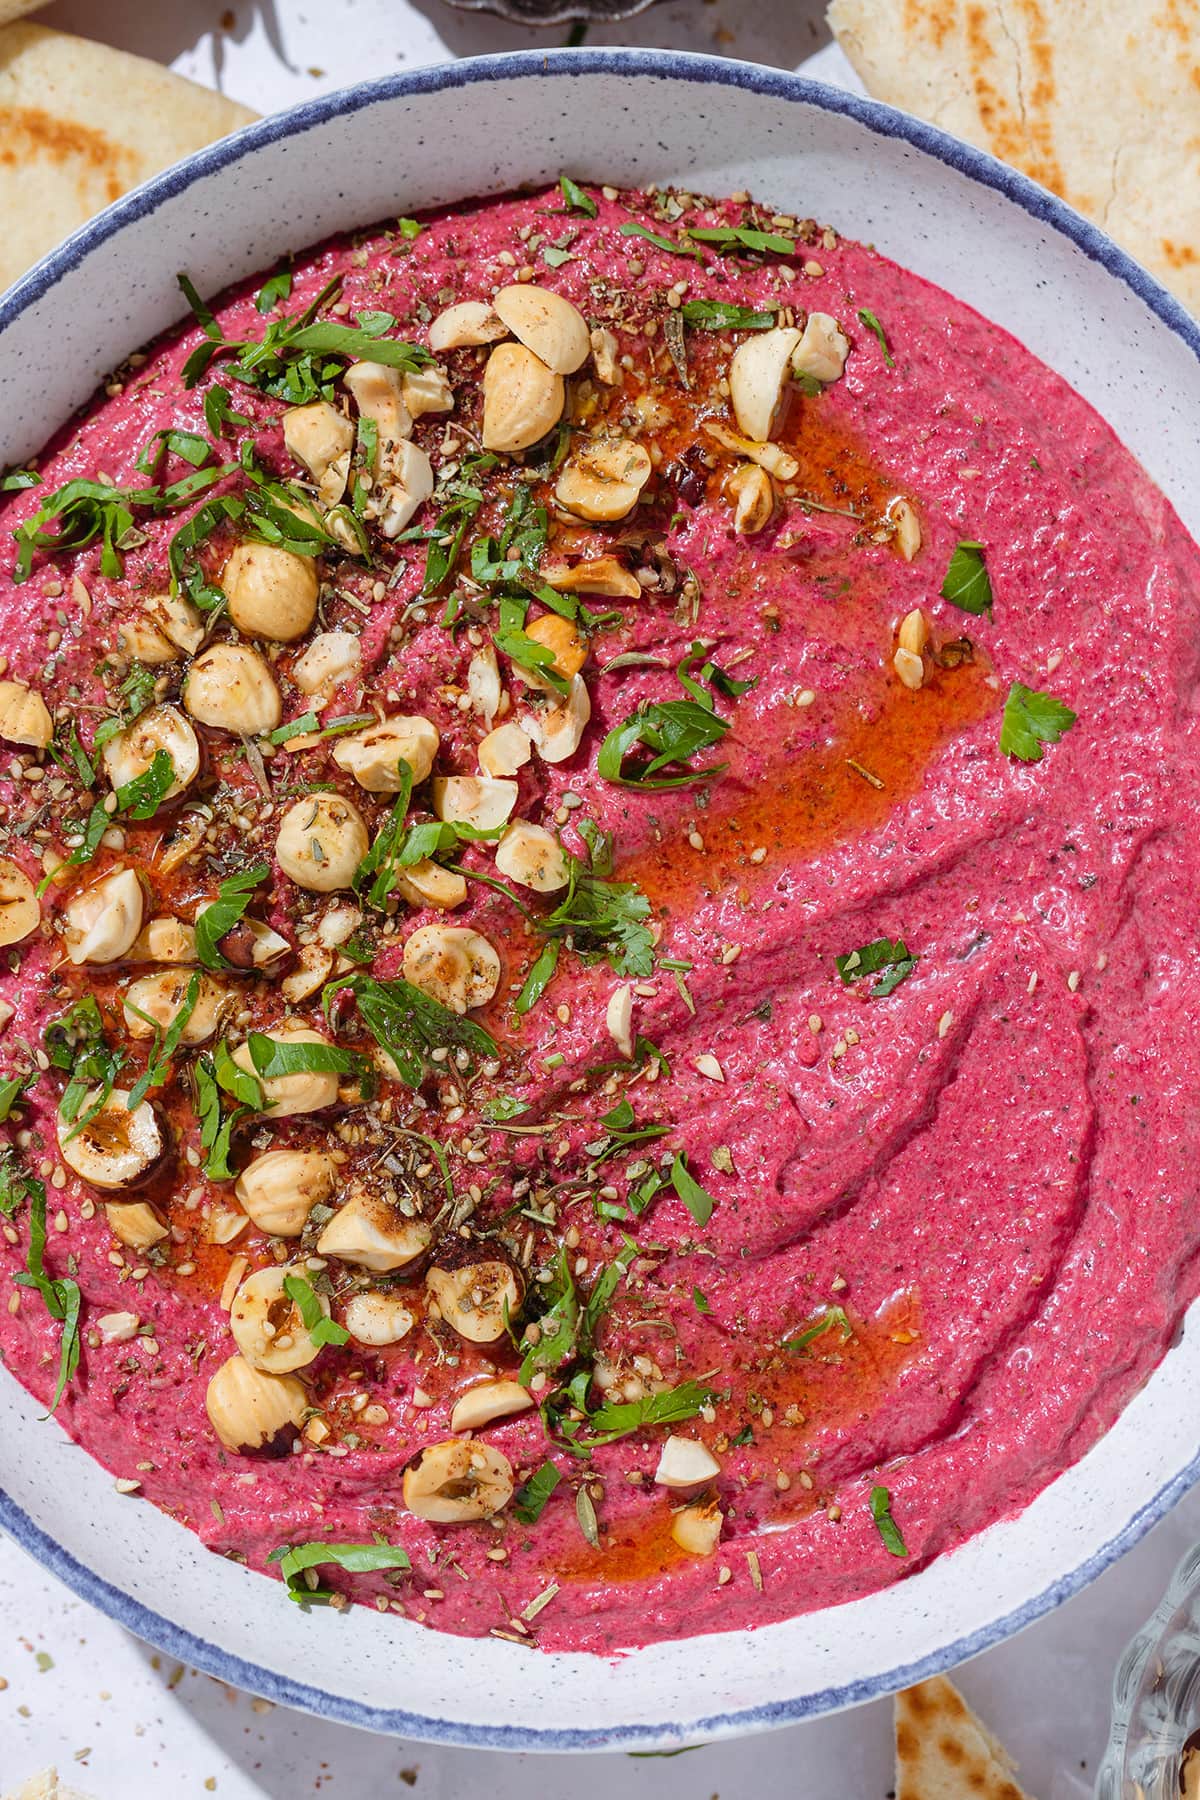 Bright pink beet dip in a white bowl with a blue rim garnished with hazelnuts, parsley, and olive oil.